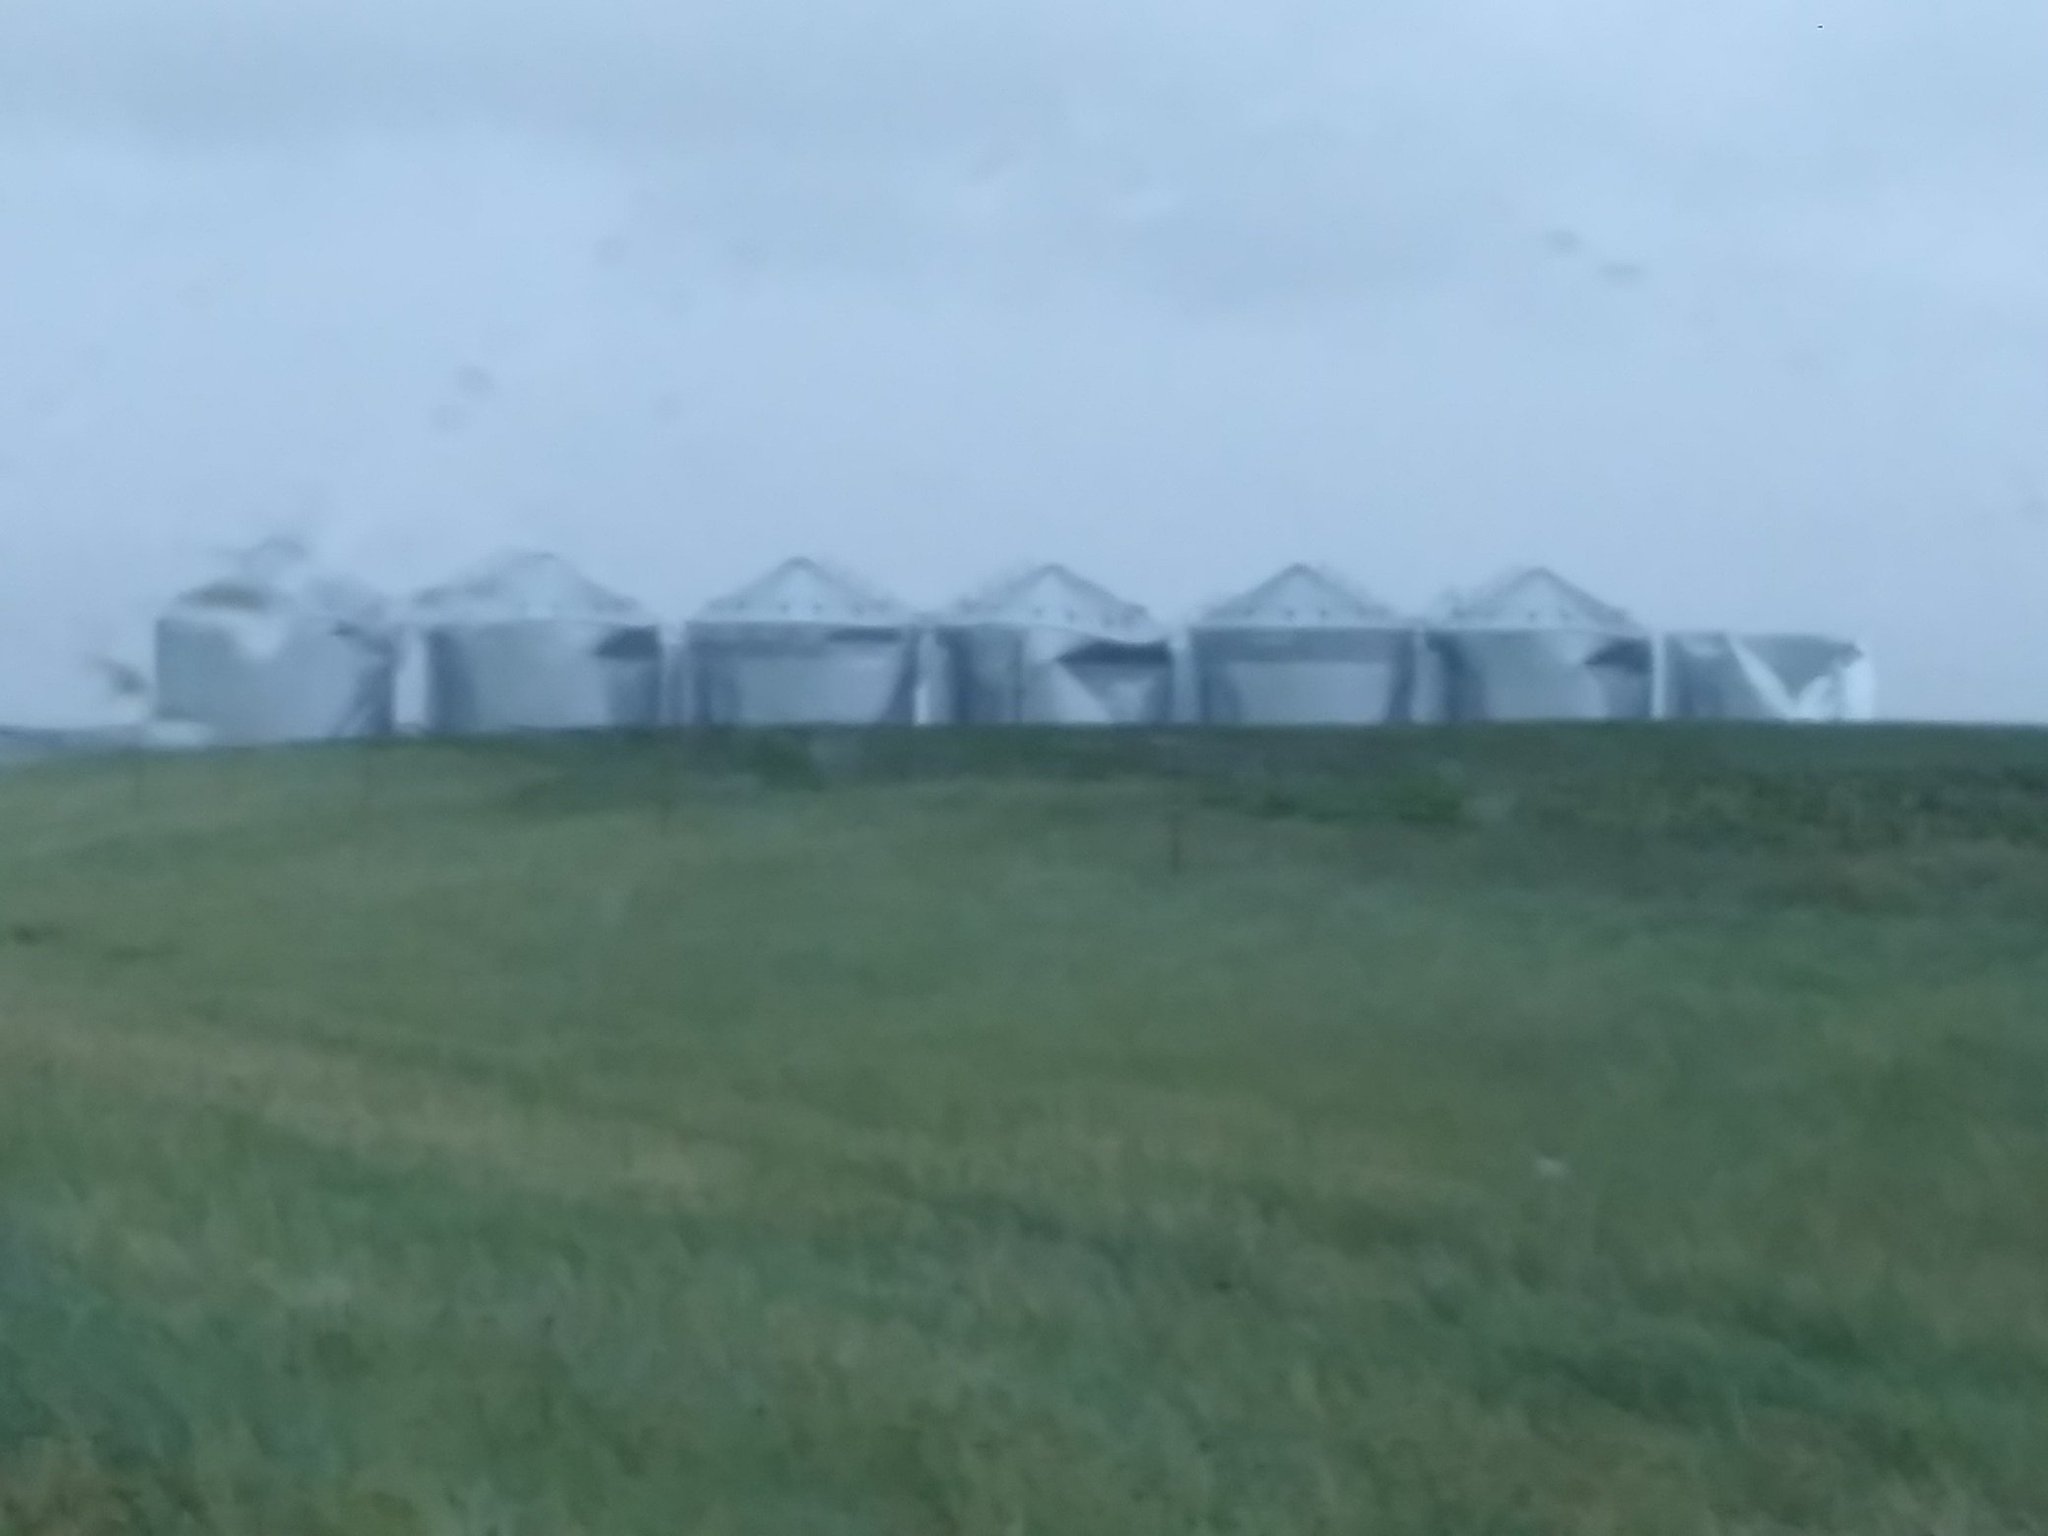 Damaged grain bins 4 miles to the north of Onida, SD - Photo from KCCR Radio